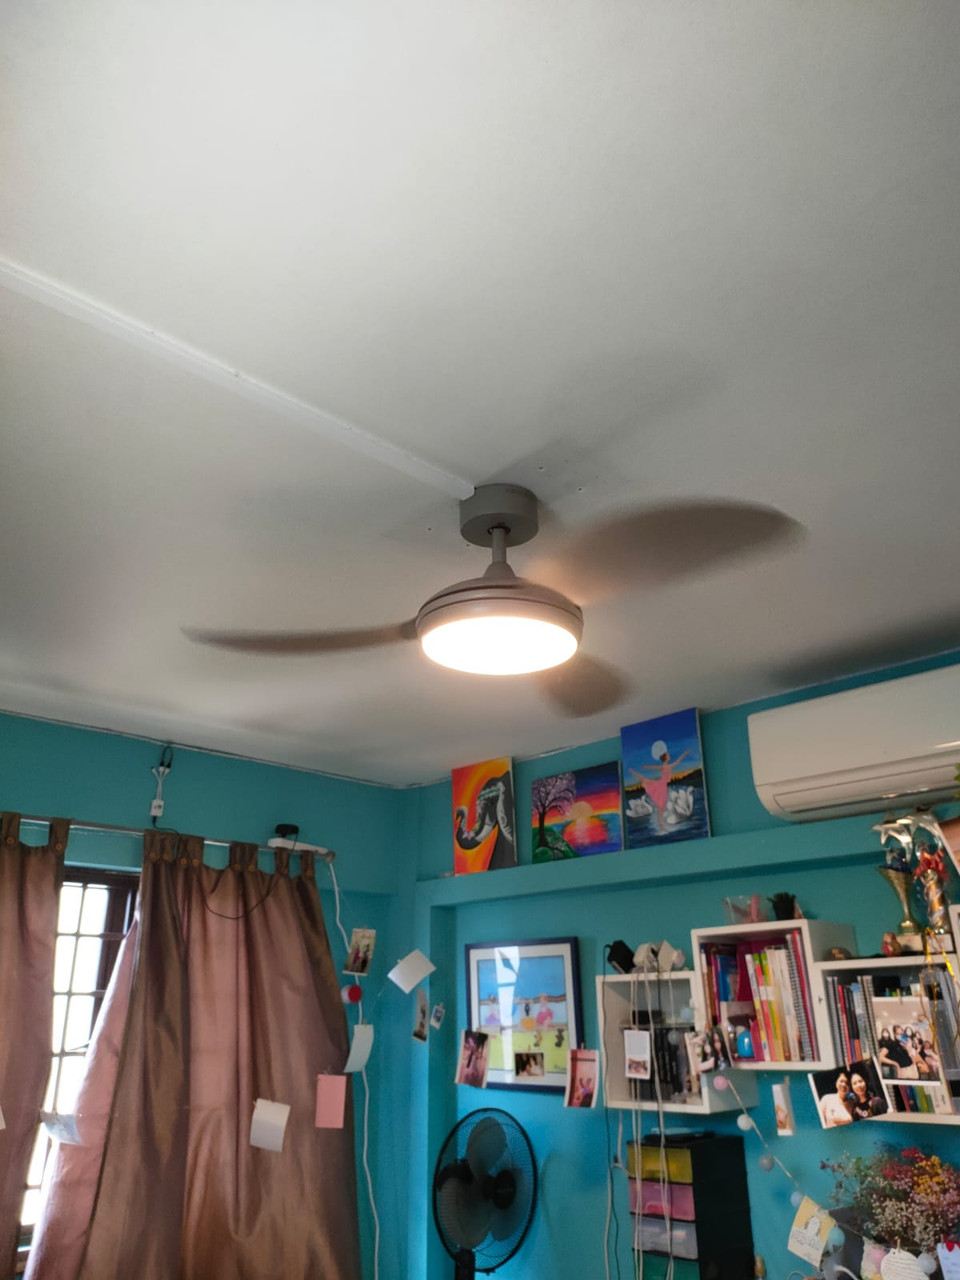 Choosing the ideal brightest ceiling fan for your space